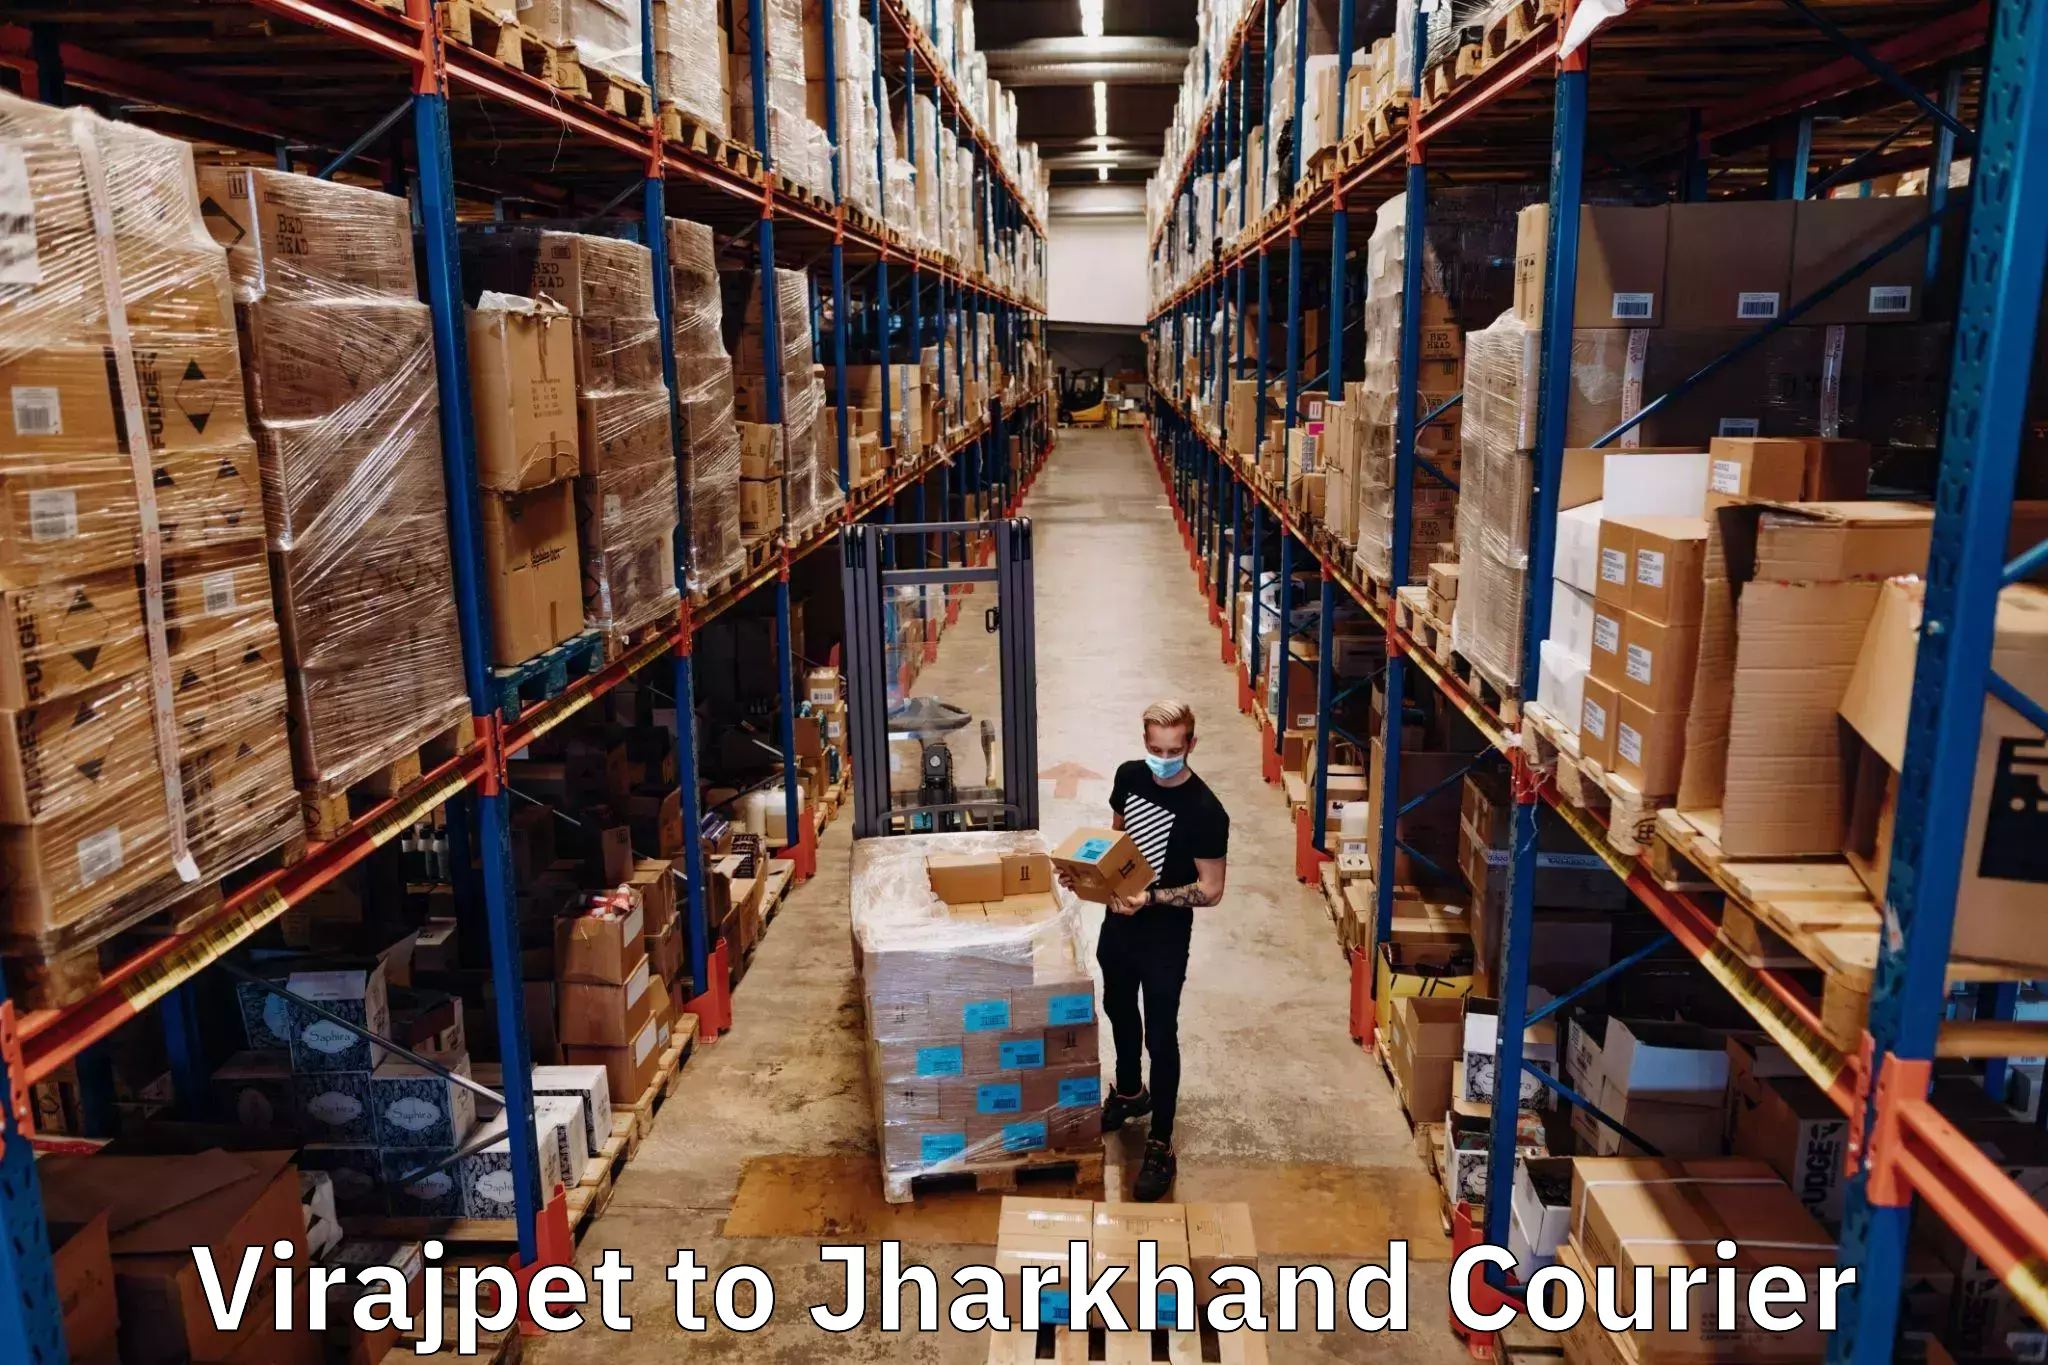 Nationwide delivery network Virajpet to Jharkhand